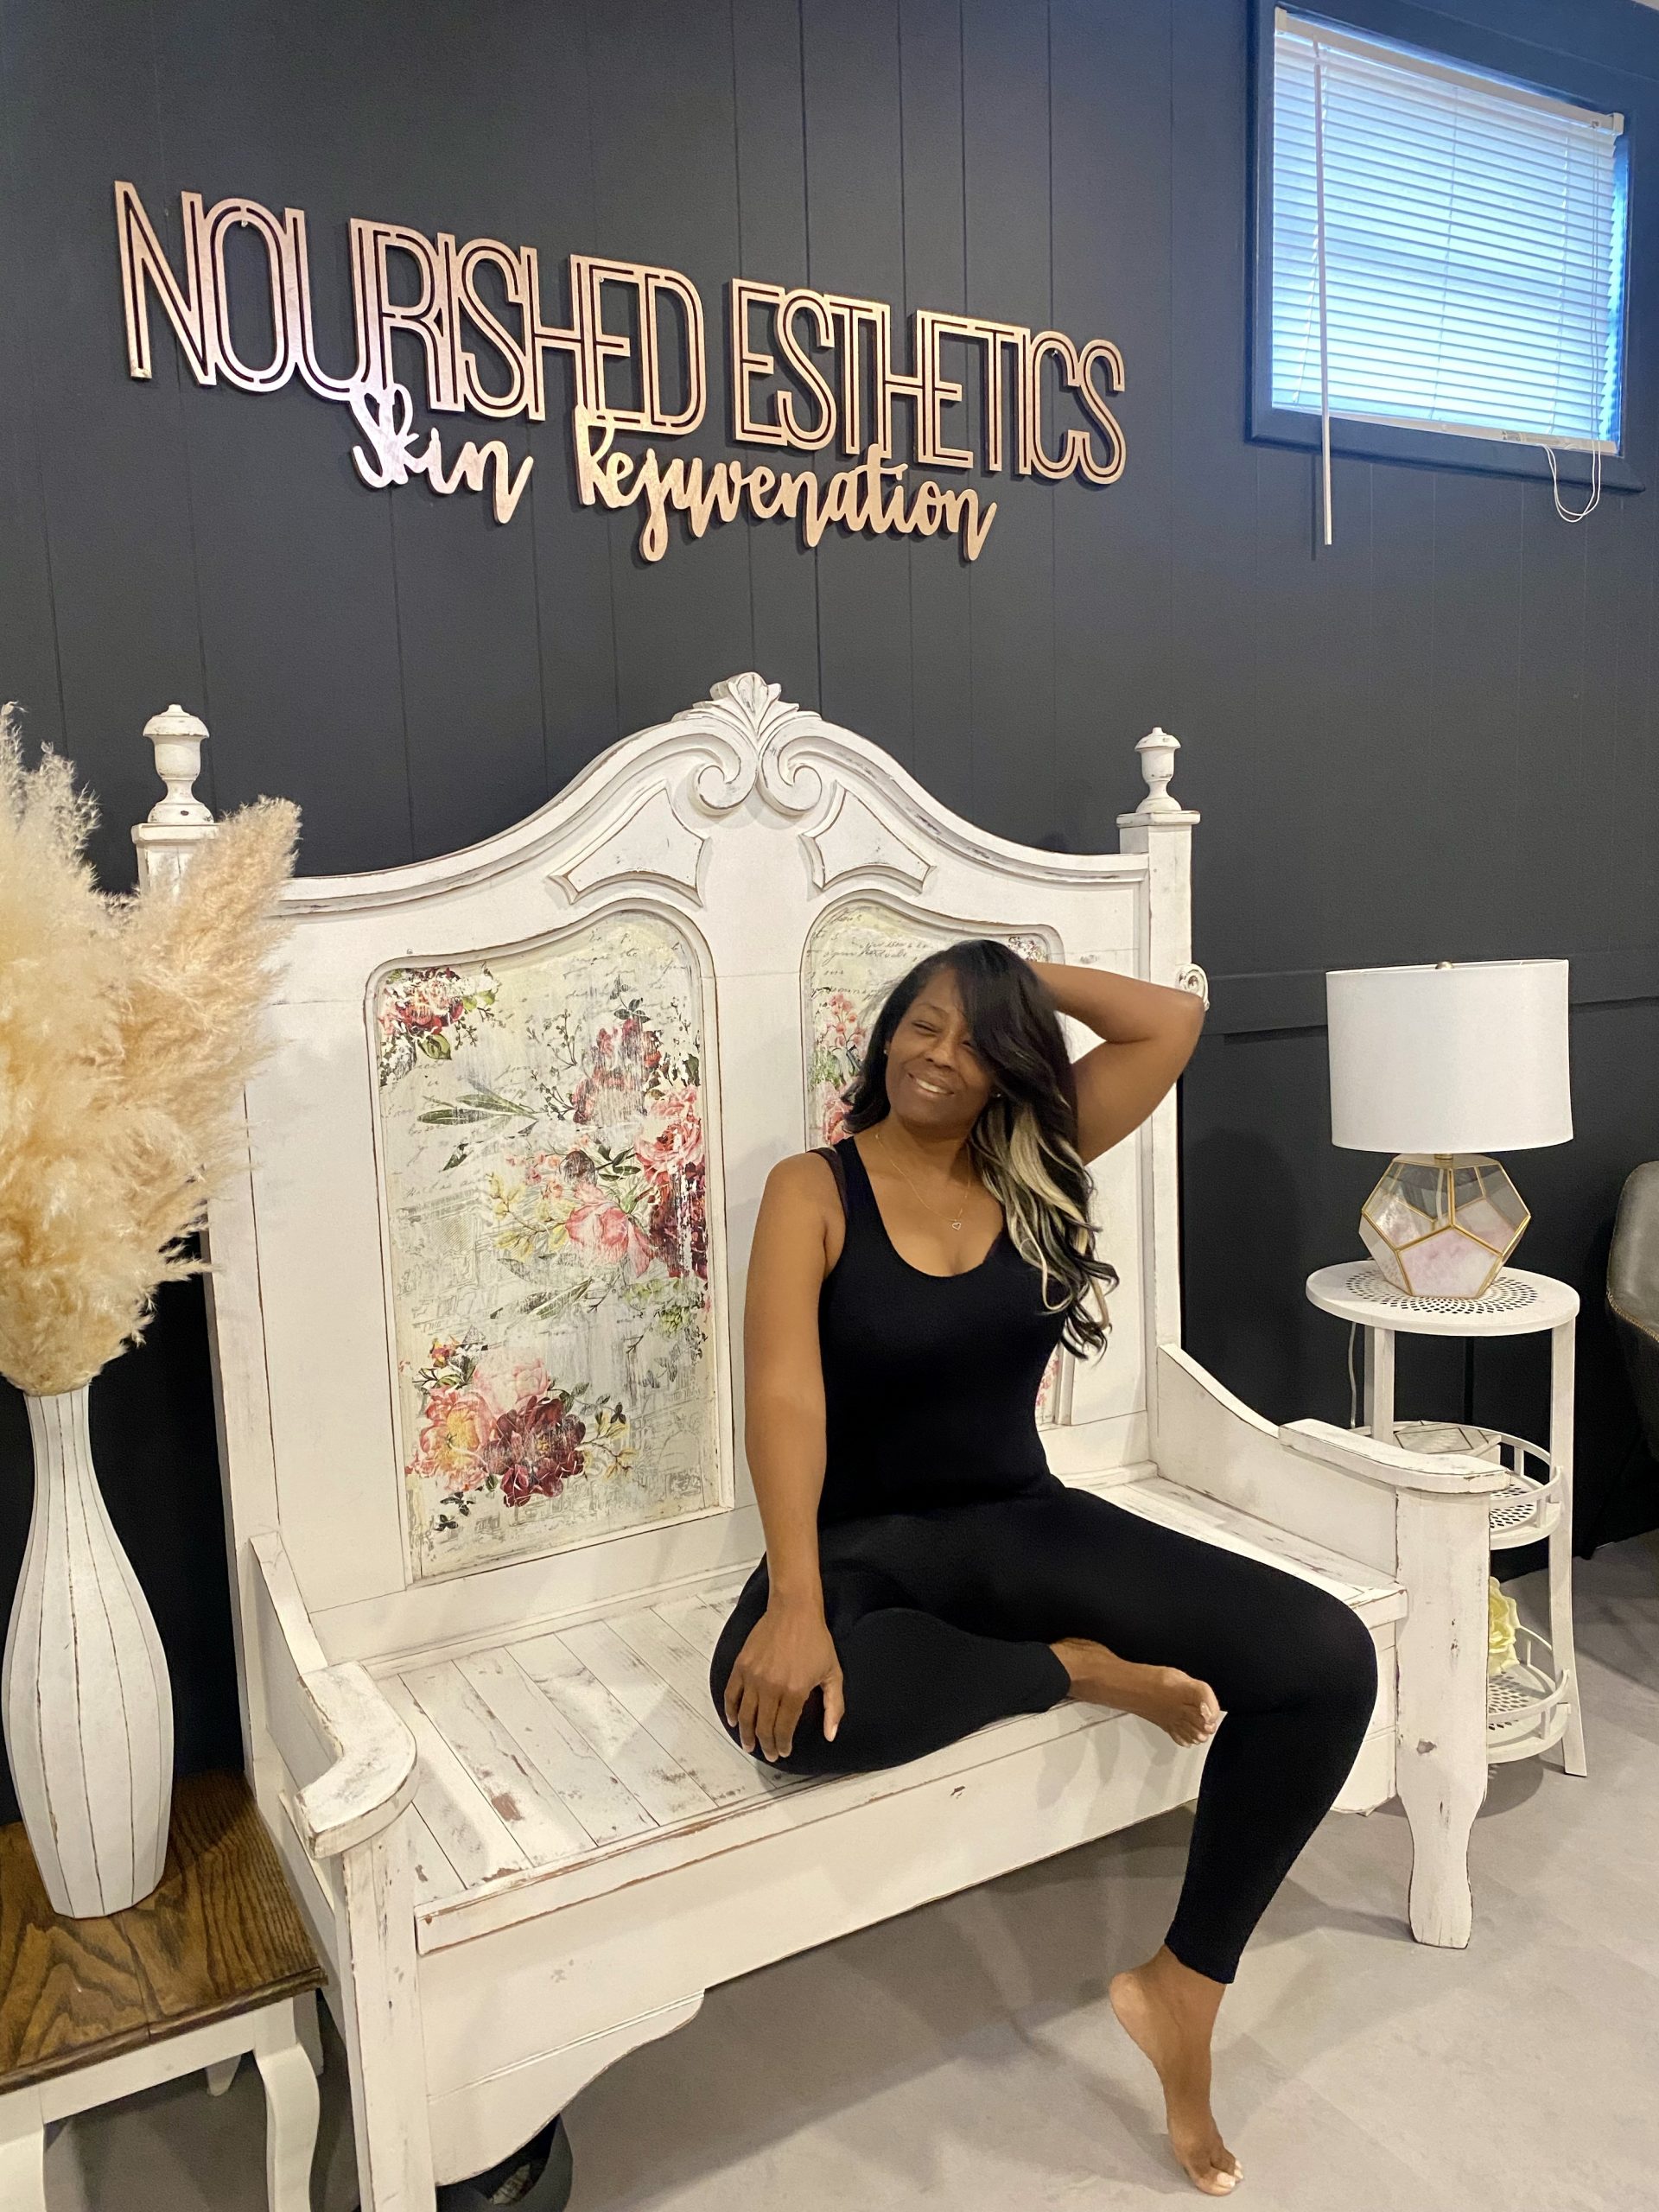 Five Reasons To Try ‘Nourished Esthetics’ In Winder, Ga